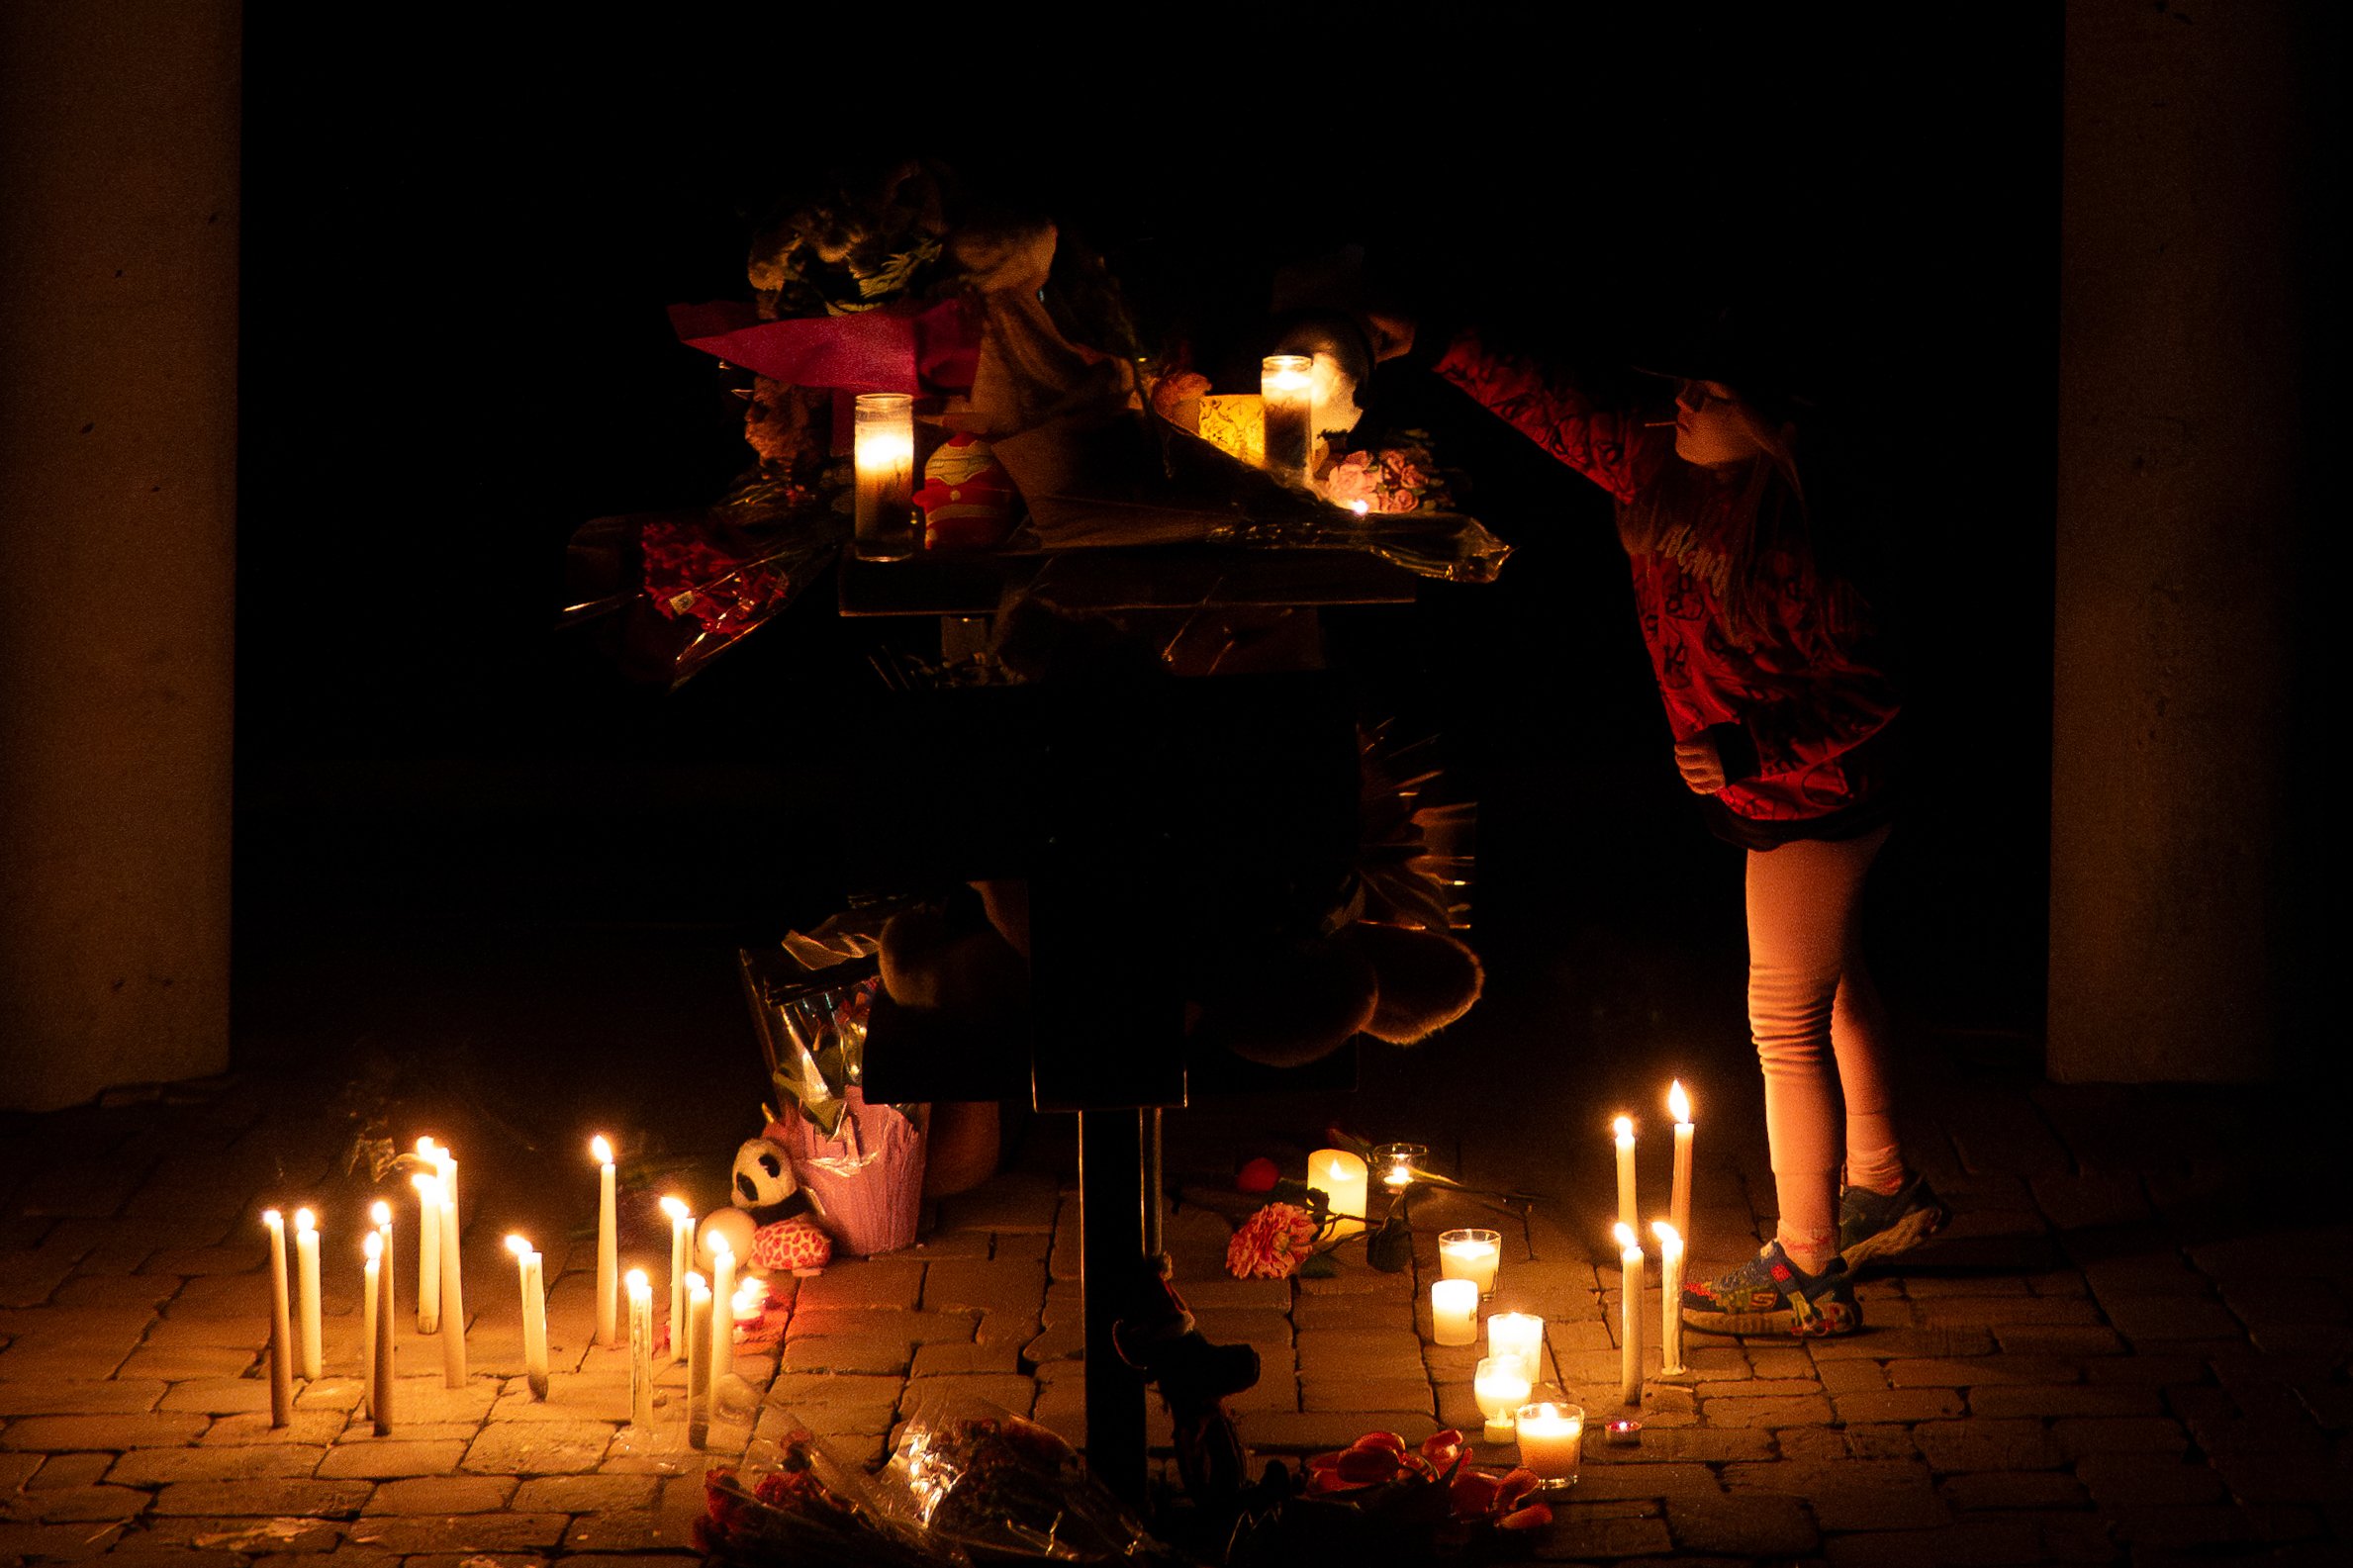  A young child places a stuffed toy on a table at a vigil at Palmadeo Park in Ottawa near the scene where six people, including a mother and her four children, were killed late Wednesday night. The killings are being described as one of the city’s wo